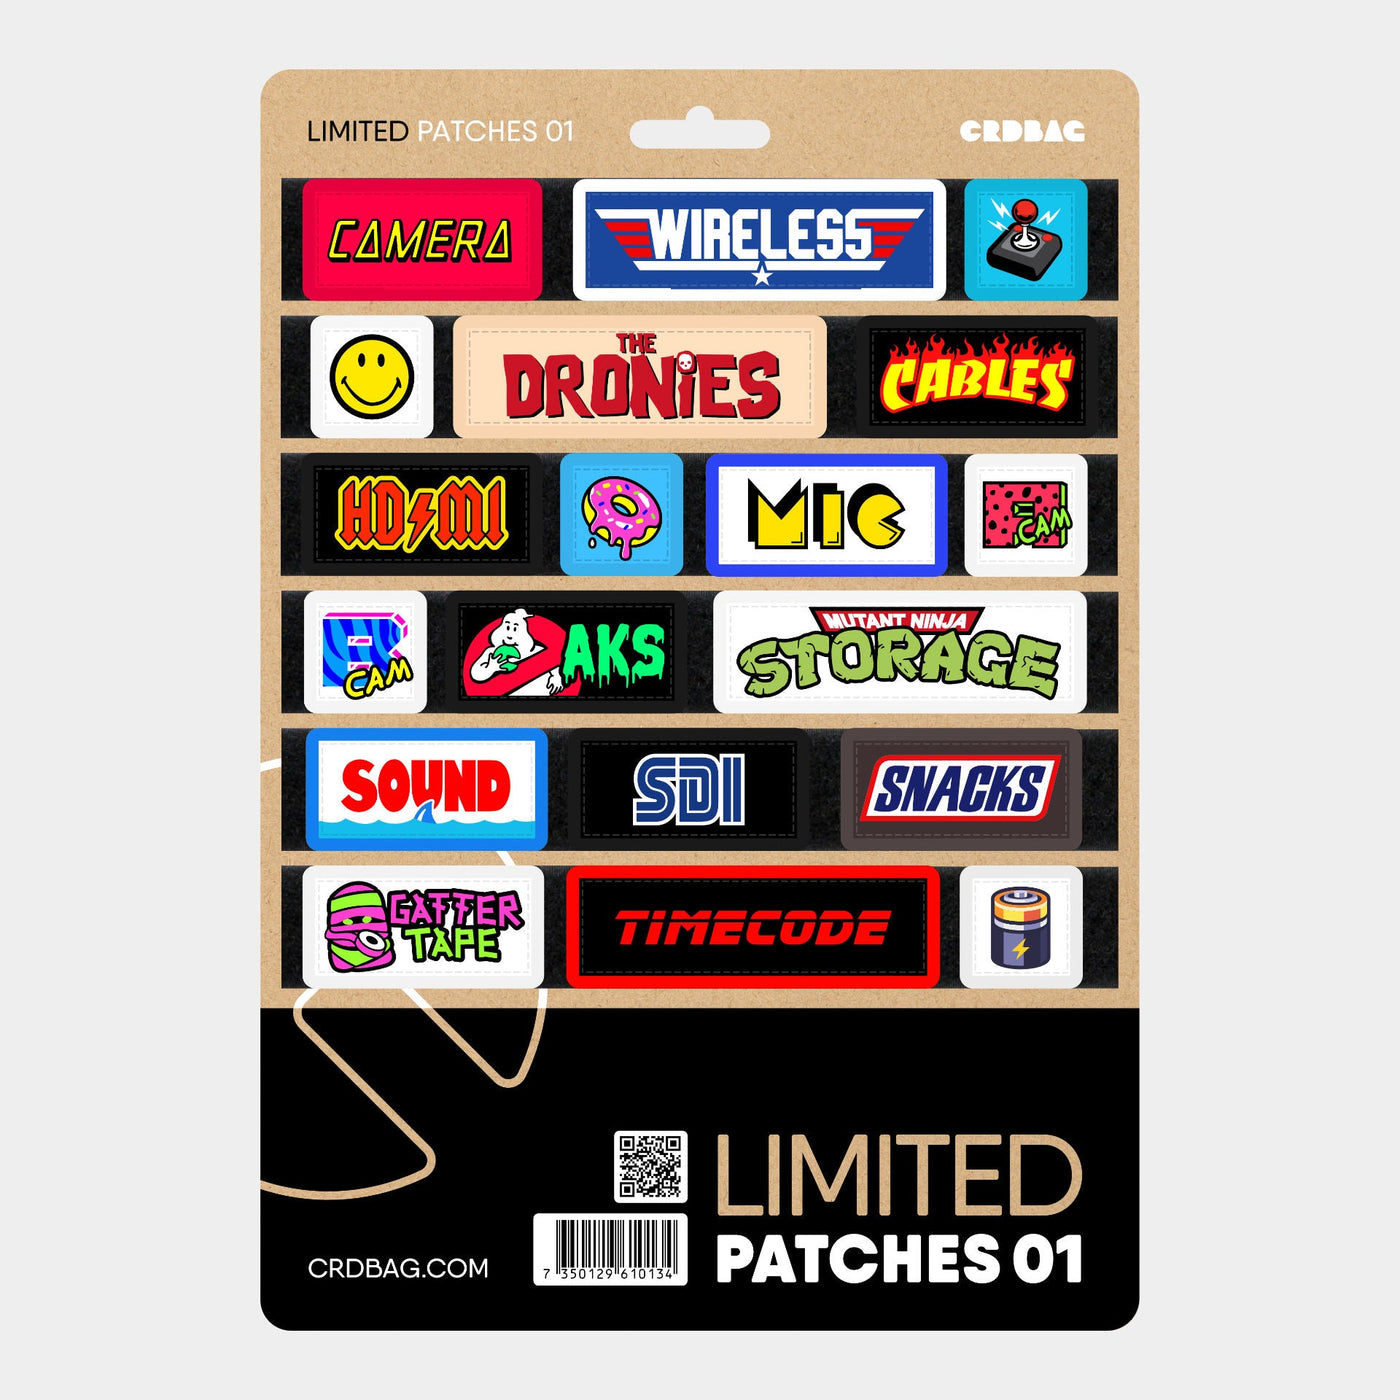 Limited Patches 01 - CRDBAG